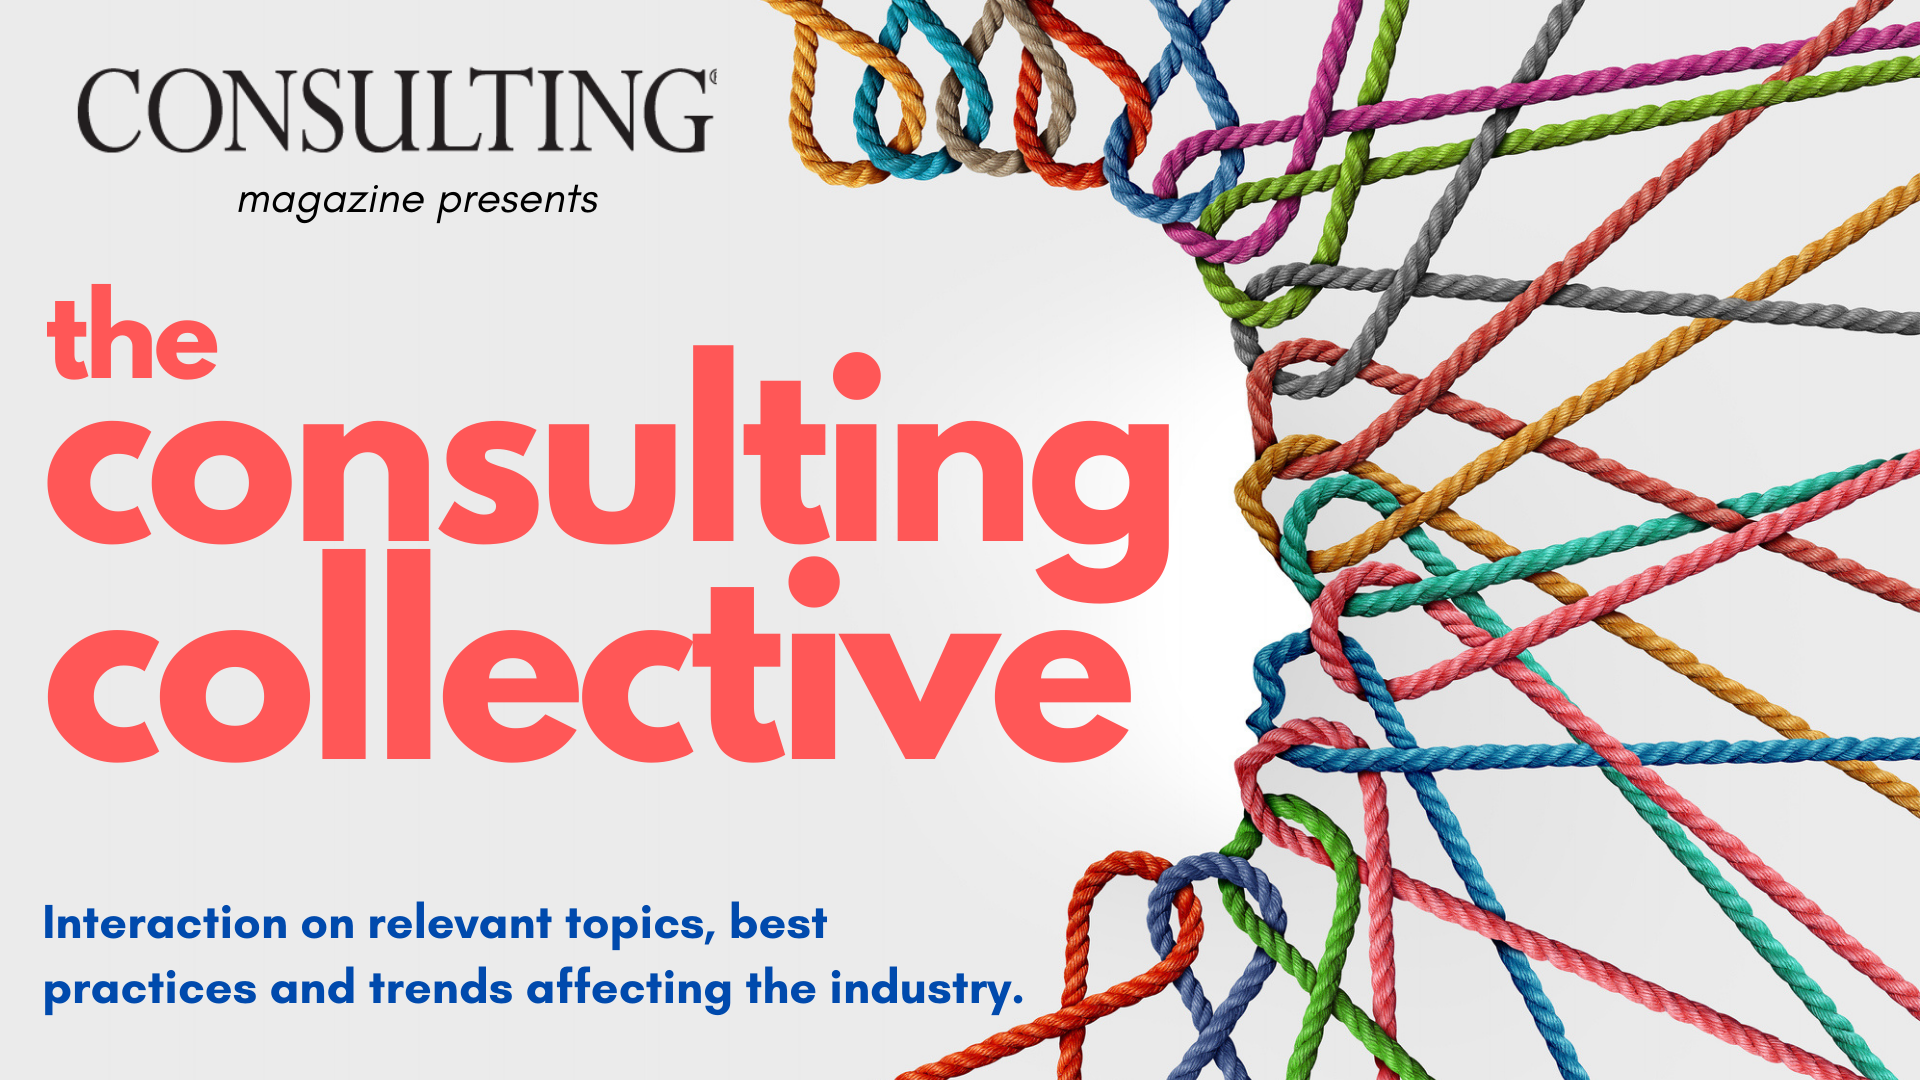 Consulting Magazine Launches ‘The Consulting Collective’ Thought Leadership Series